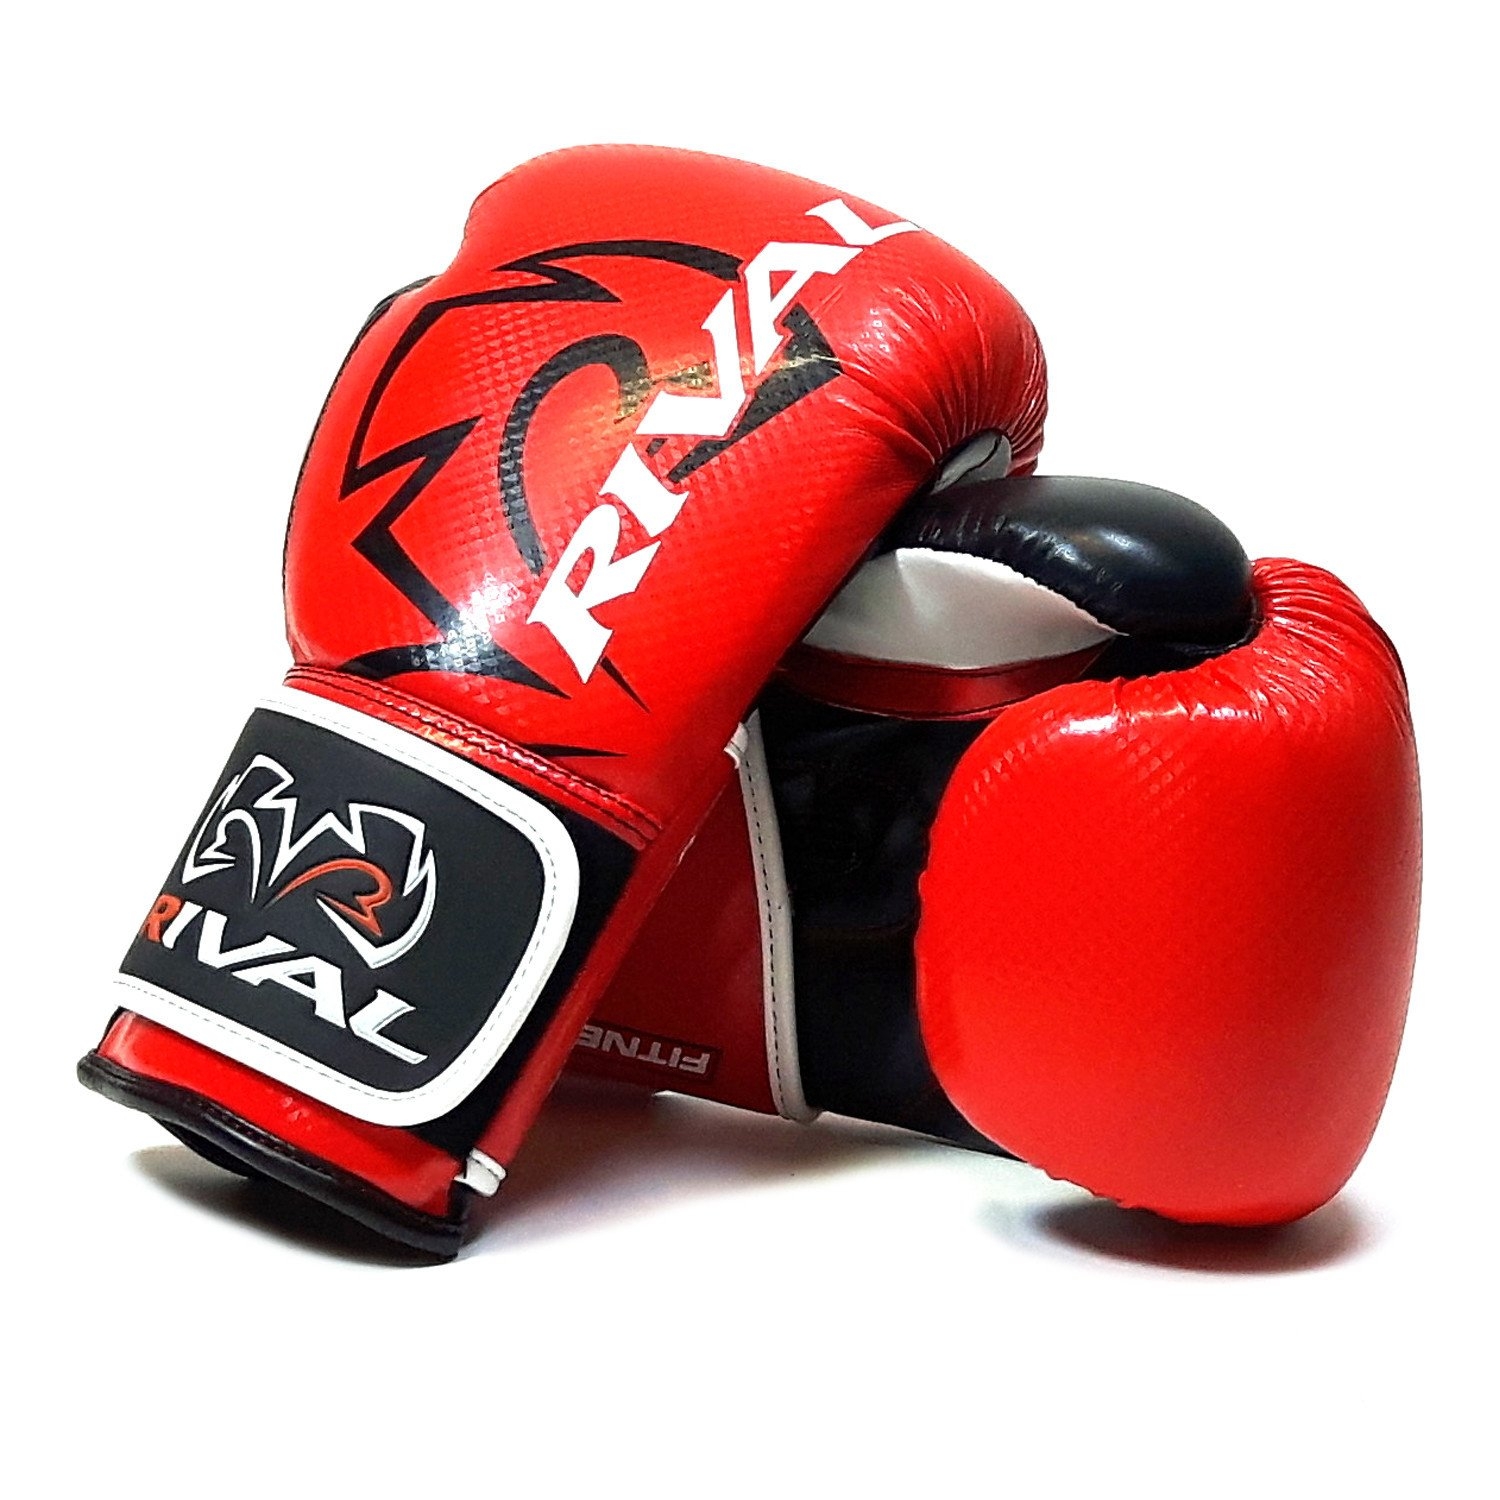 Rival Rb7 Fitness Bag Training Boxing Gloves Red Black  – Size: 16 – Adult – Unisex